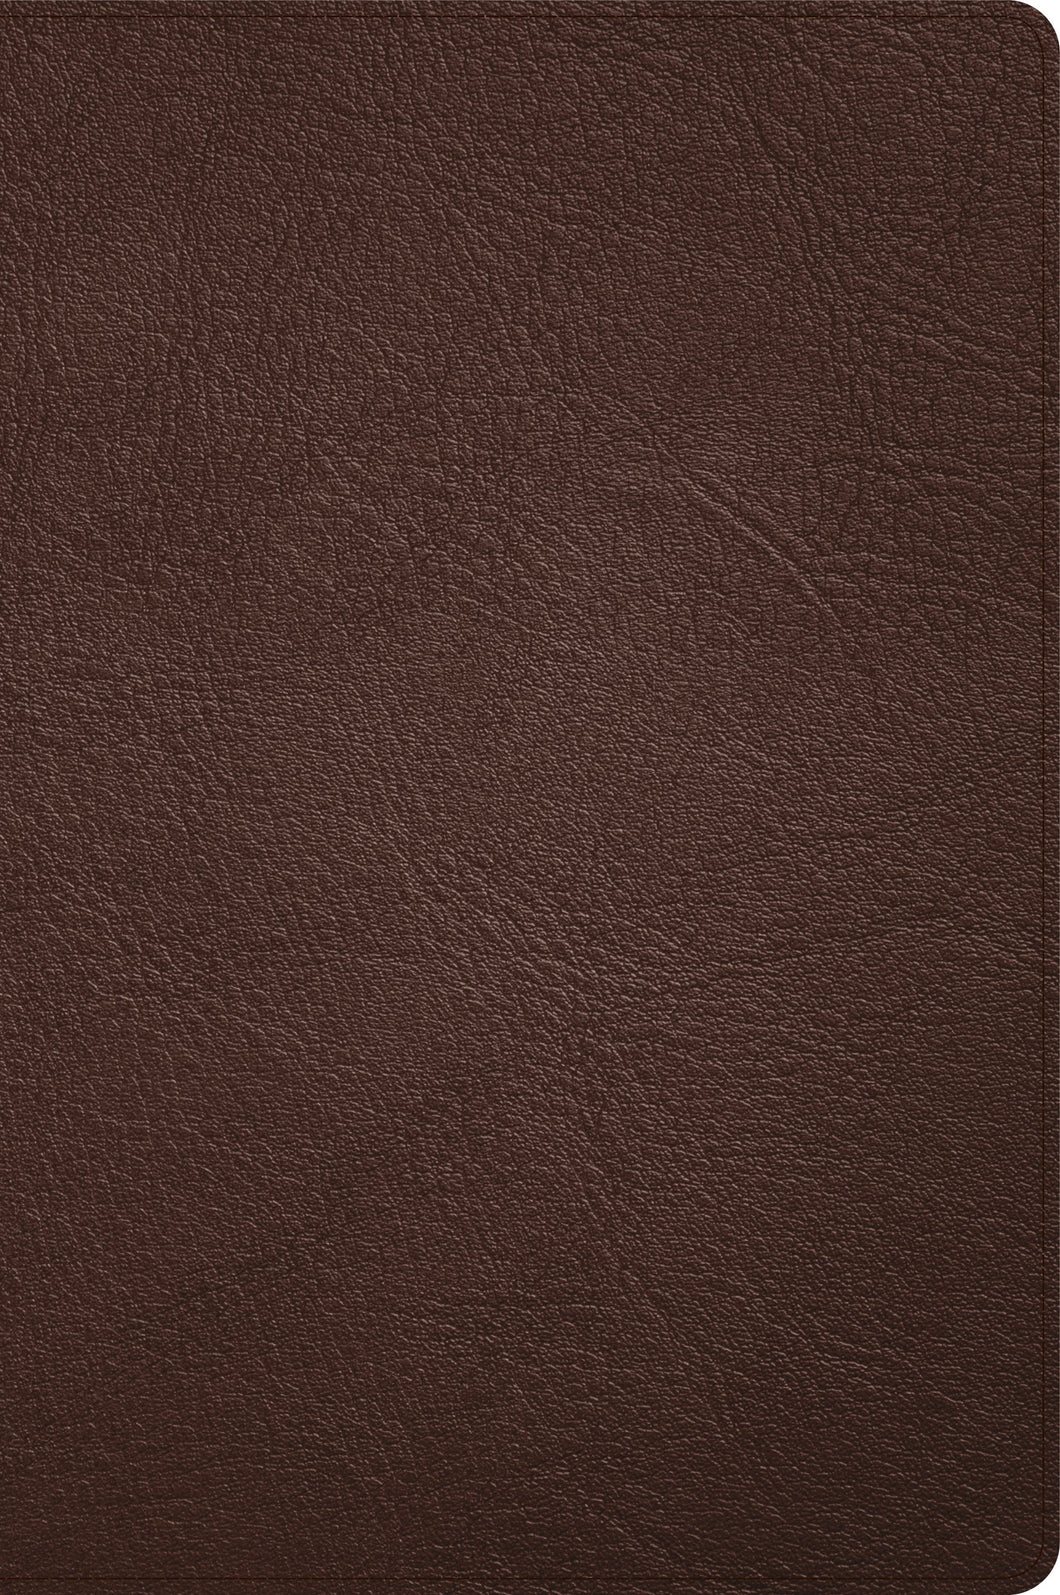 CSB Large Print Thinline Bible (Holman Handcrafted Collection)-Brown Premium Goatskin